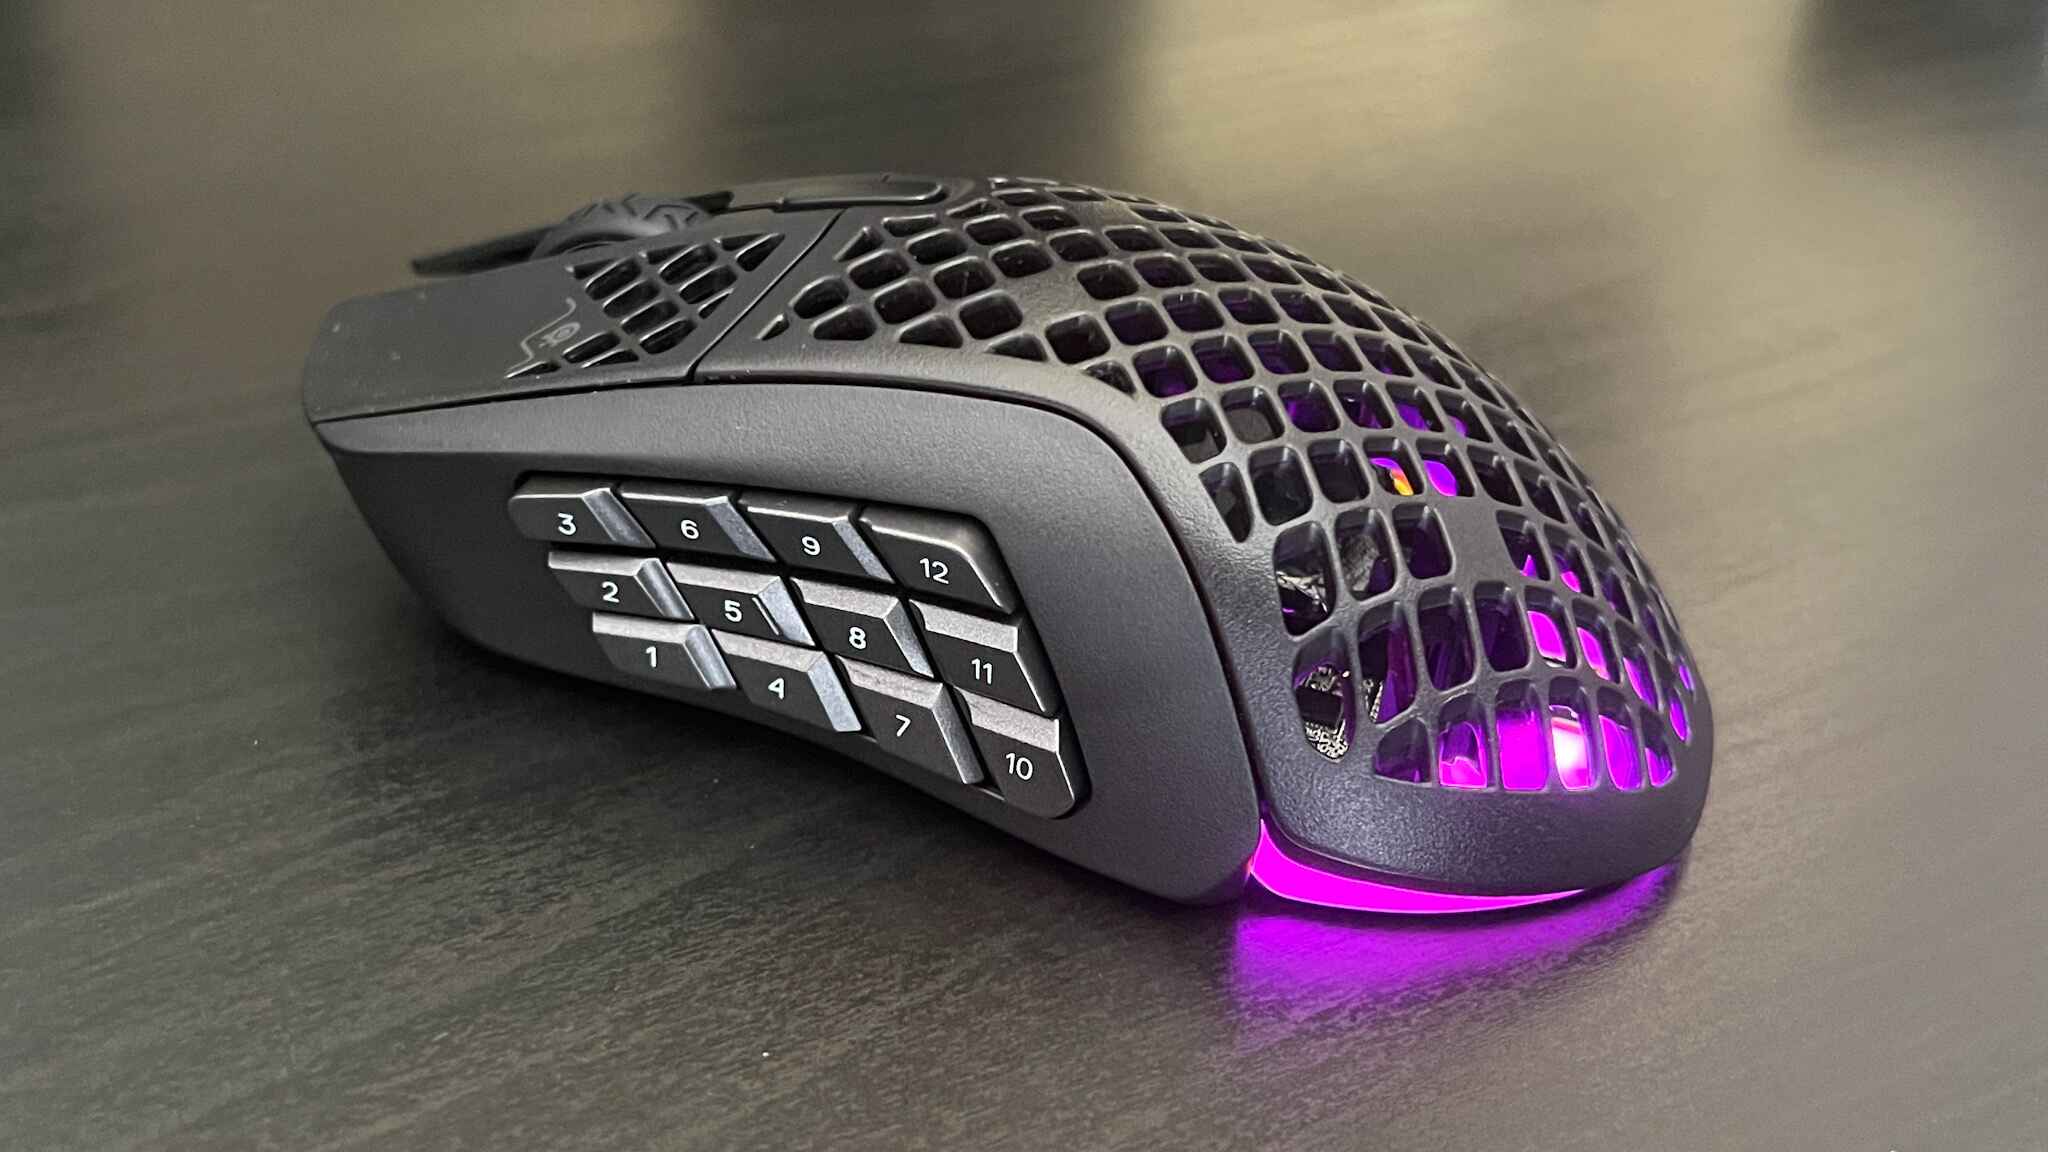 How To Change Profiles With The Steelseries Mmo Gaming Mouse (Legendary Edition)